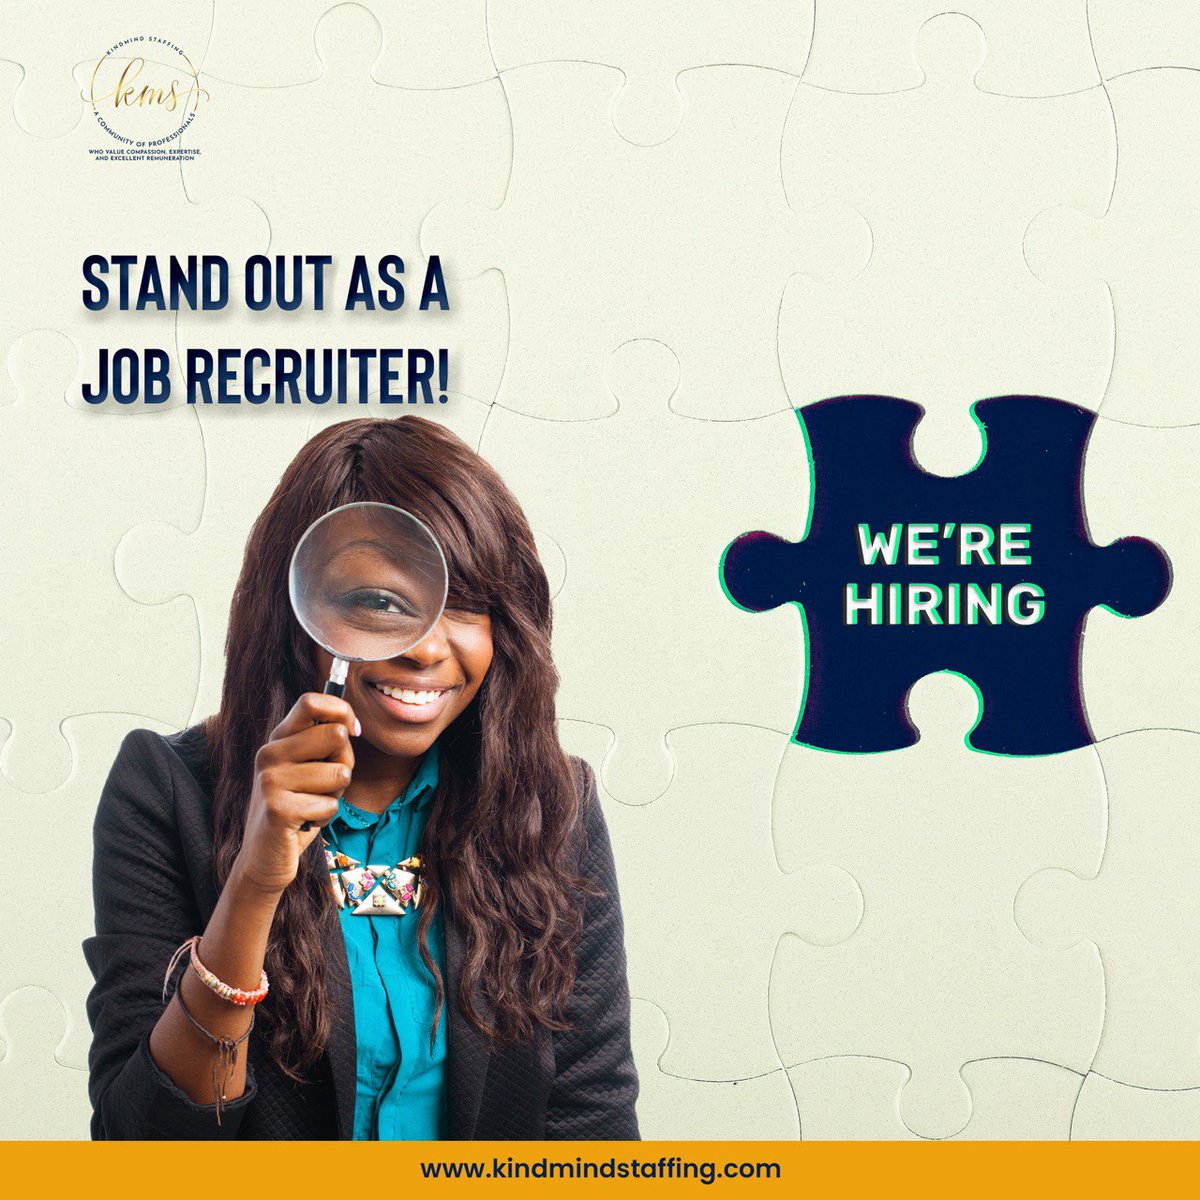 Stand Out as a Job Recruiter!

Showcase your company culture during the recruitment process. Highlight your values, team dynamics, and growth opportunities to attract candidates who align with your organization's vision. 

#RecruitmentTips #CompanyCulture #AttractTopTalent